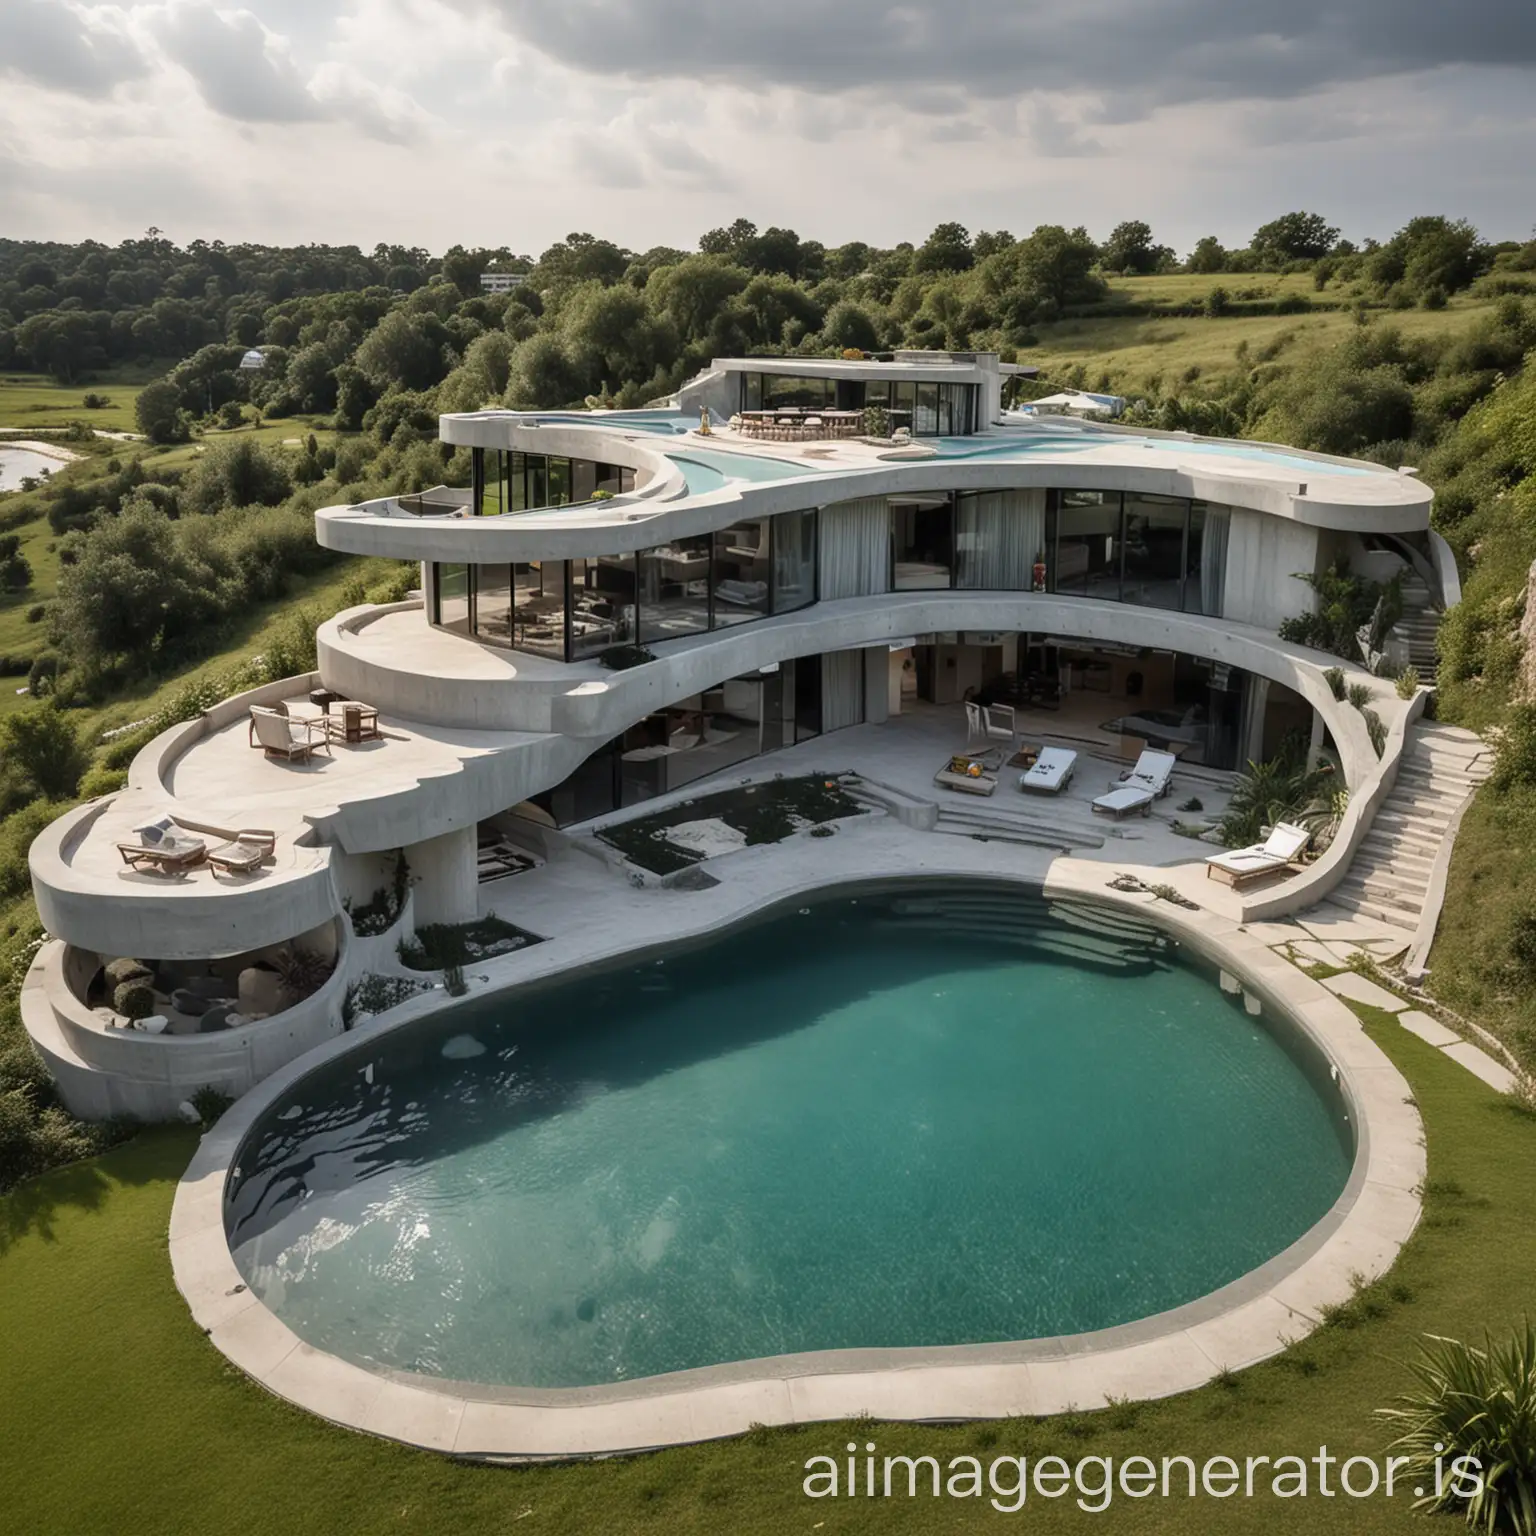 Curved concrete house with north, west and east views, having underground parking, 3 pools(cascading pools from a higher level in the east to the lower level pool in the west), it is a 2 storey house with garden and a pond